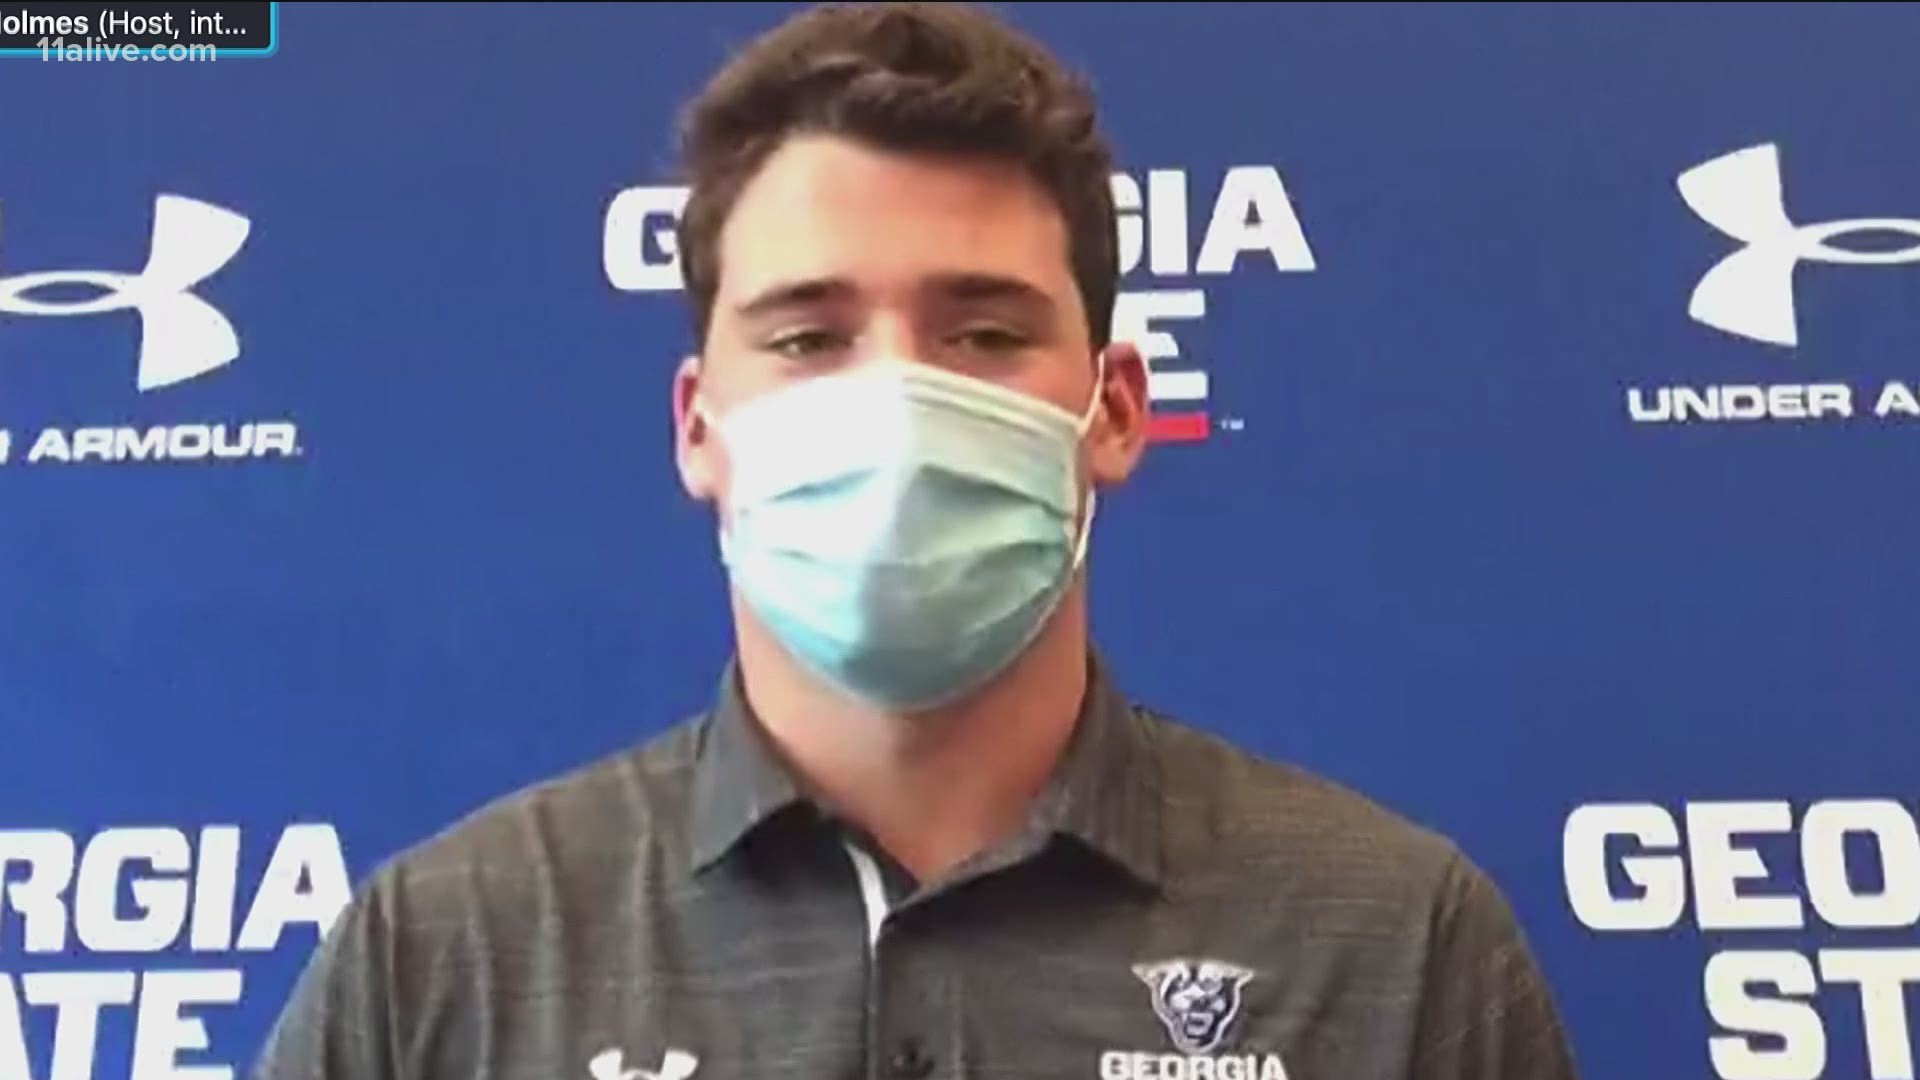 Mikele Colasurdo spoke out Tuesday, warning other athletes to take the virus serious.